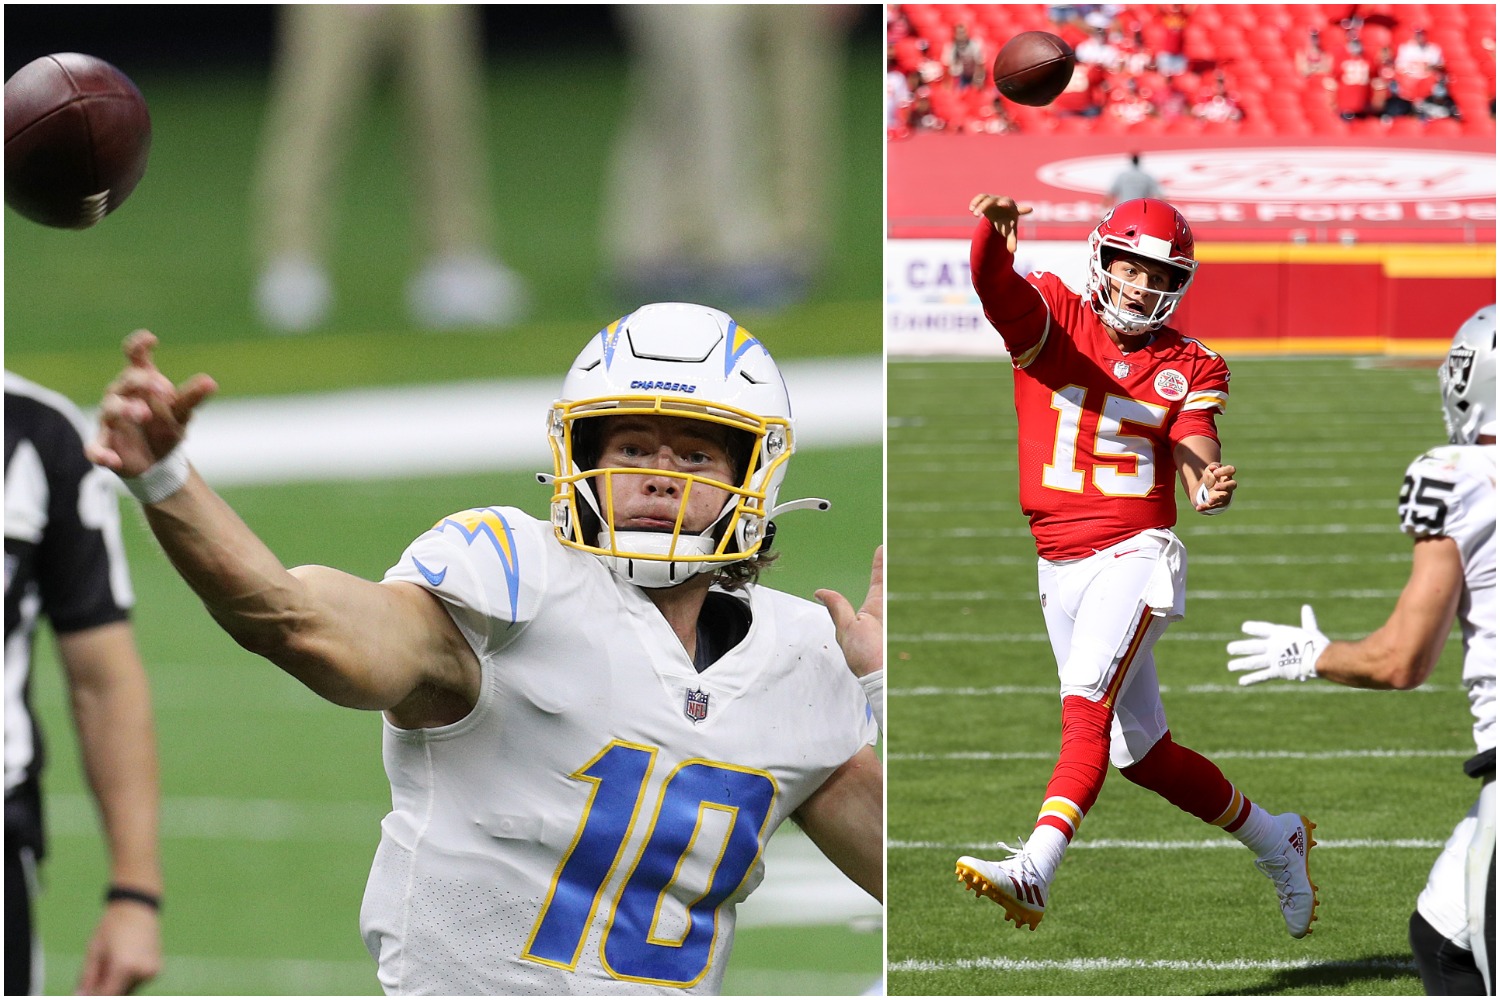 The Los Angeles Chargers found their own Patrick Mahomes in the form of first-round rookie Justin Herbert, who looked fantastic against the Saints on Monday Night Football.